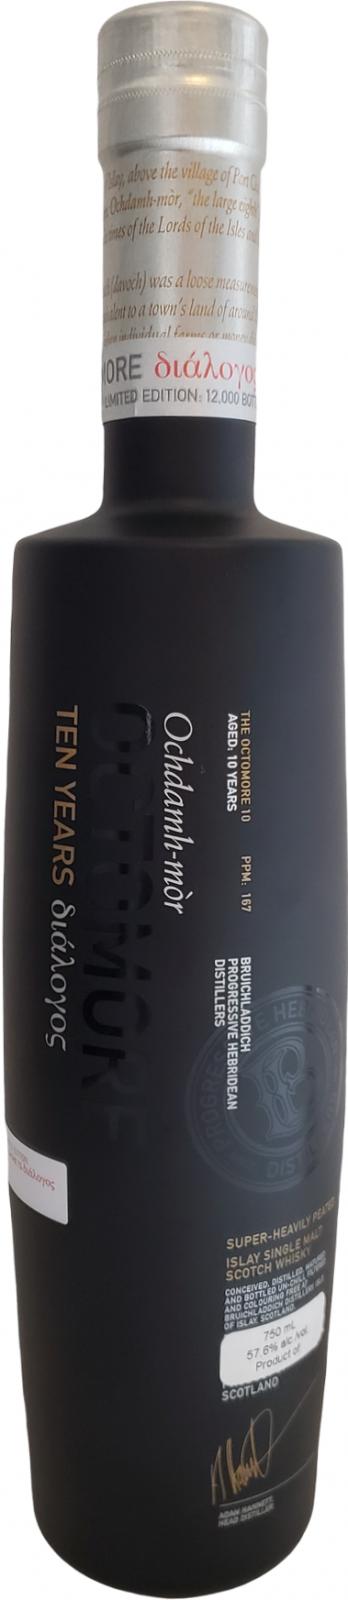 Octomore 10-year-old διάλογος